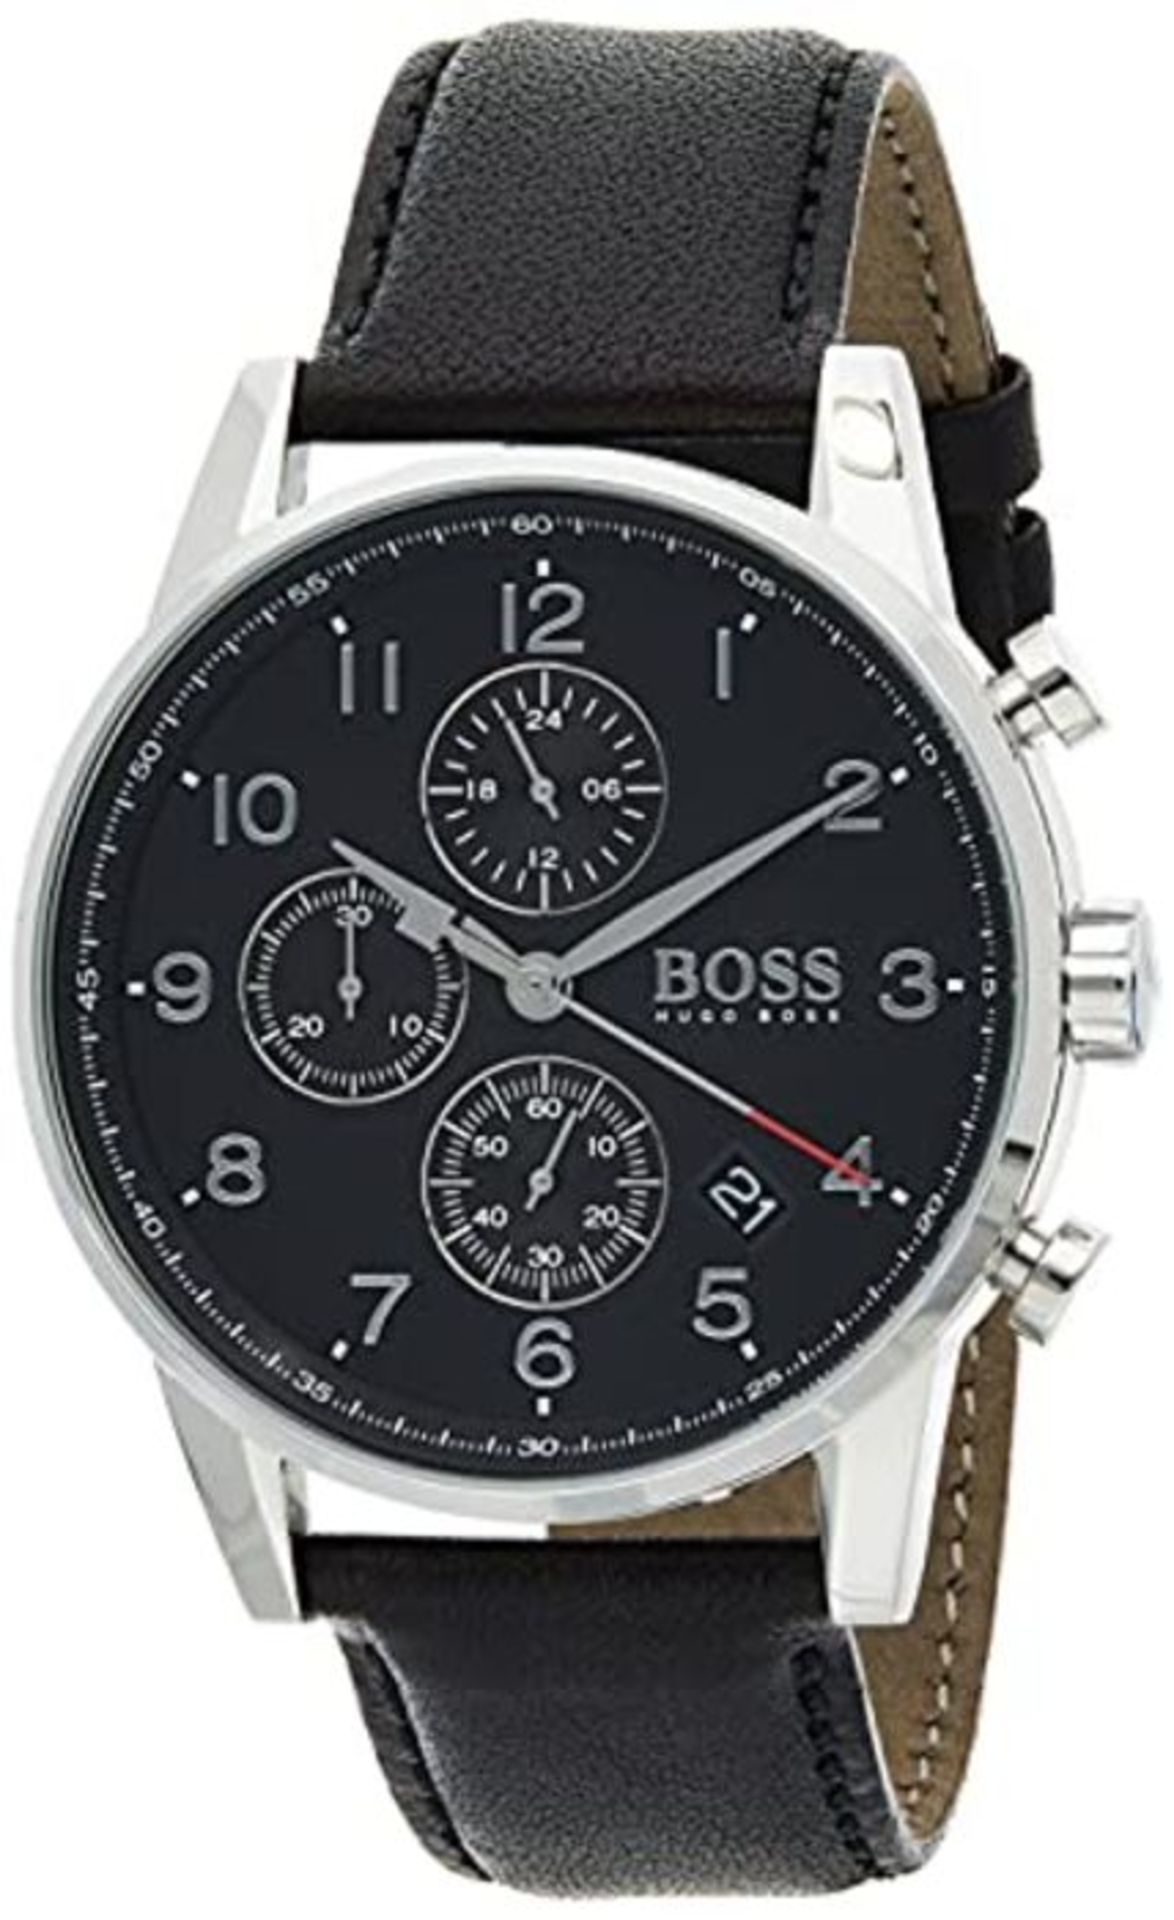 RRP £239.00 BOSS Watches Men's Chronograph Quartz Watch with Leather Strap 1513678